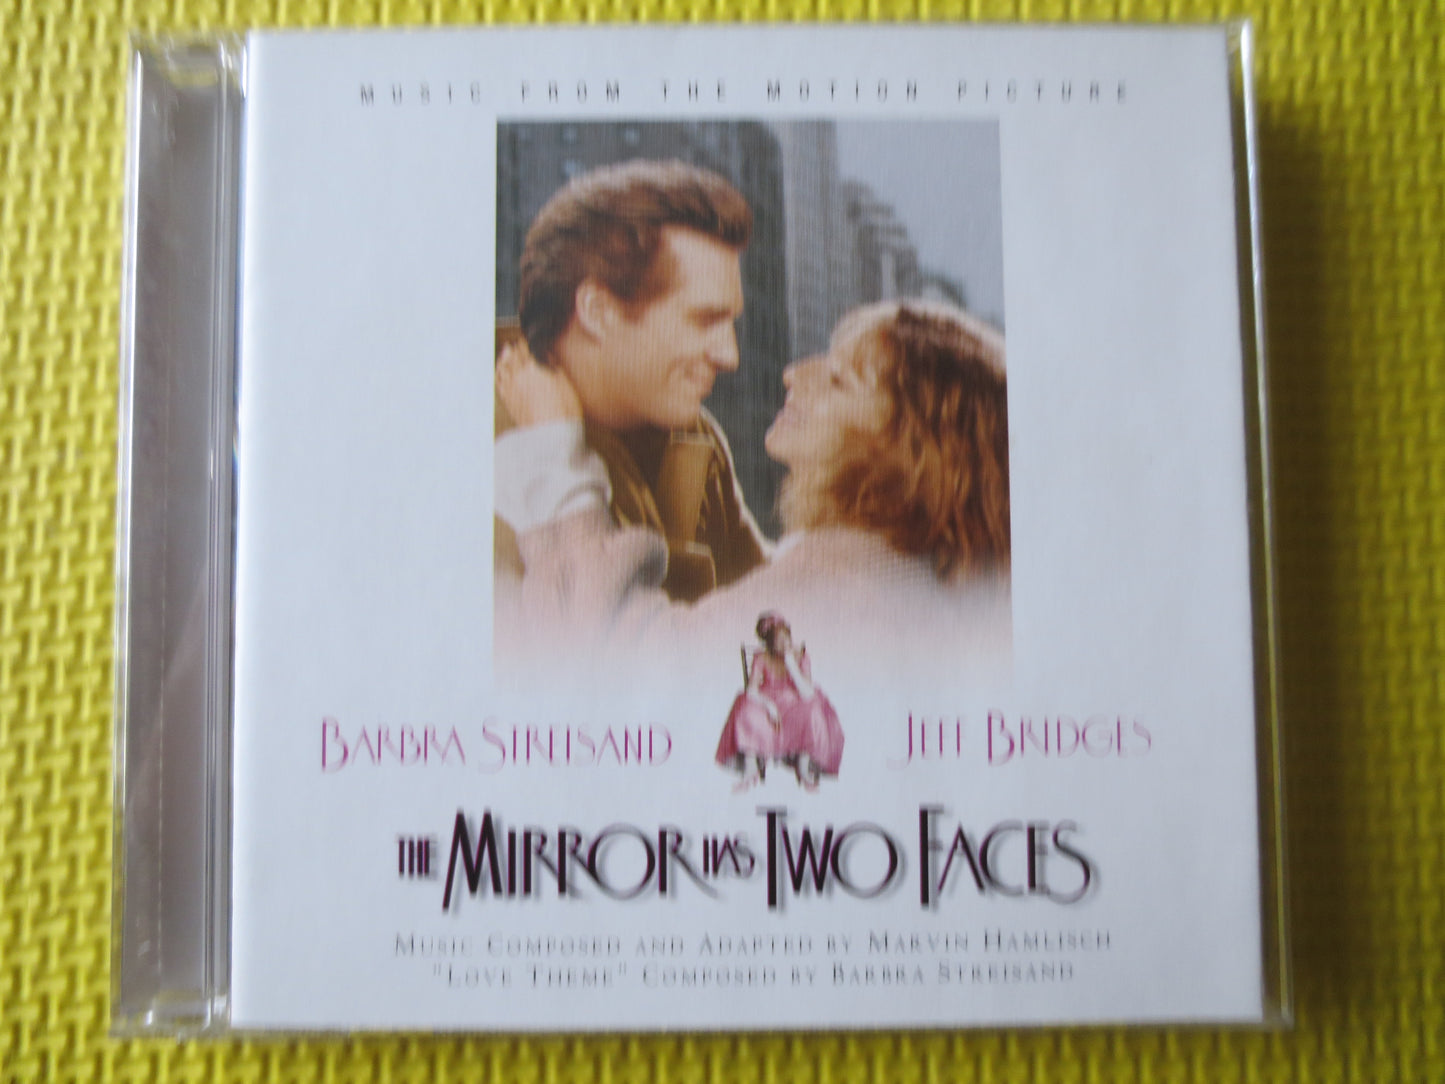 BARBRA STREISAND, The MIRROR Has Two Faces, Cds, Vintage Cd, Barbra Streisand Cd, Compact Disc, Music Cd, 1996 Compact Disc